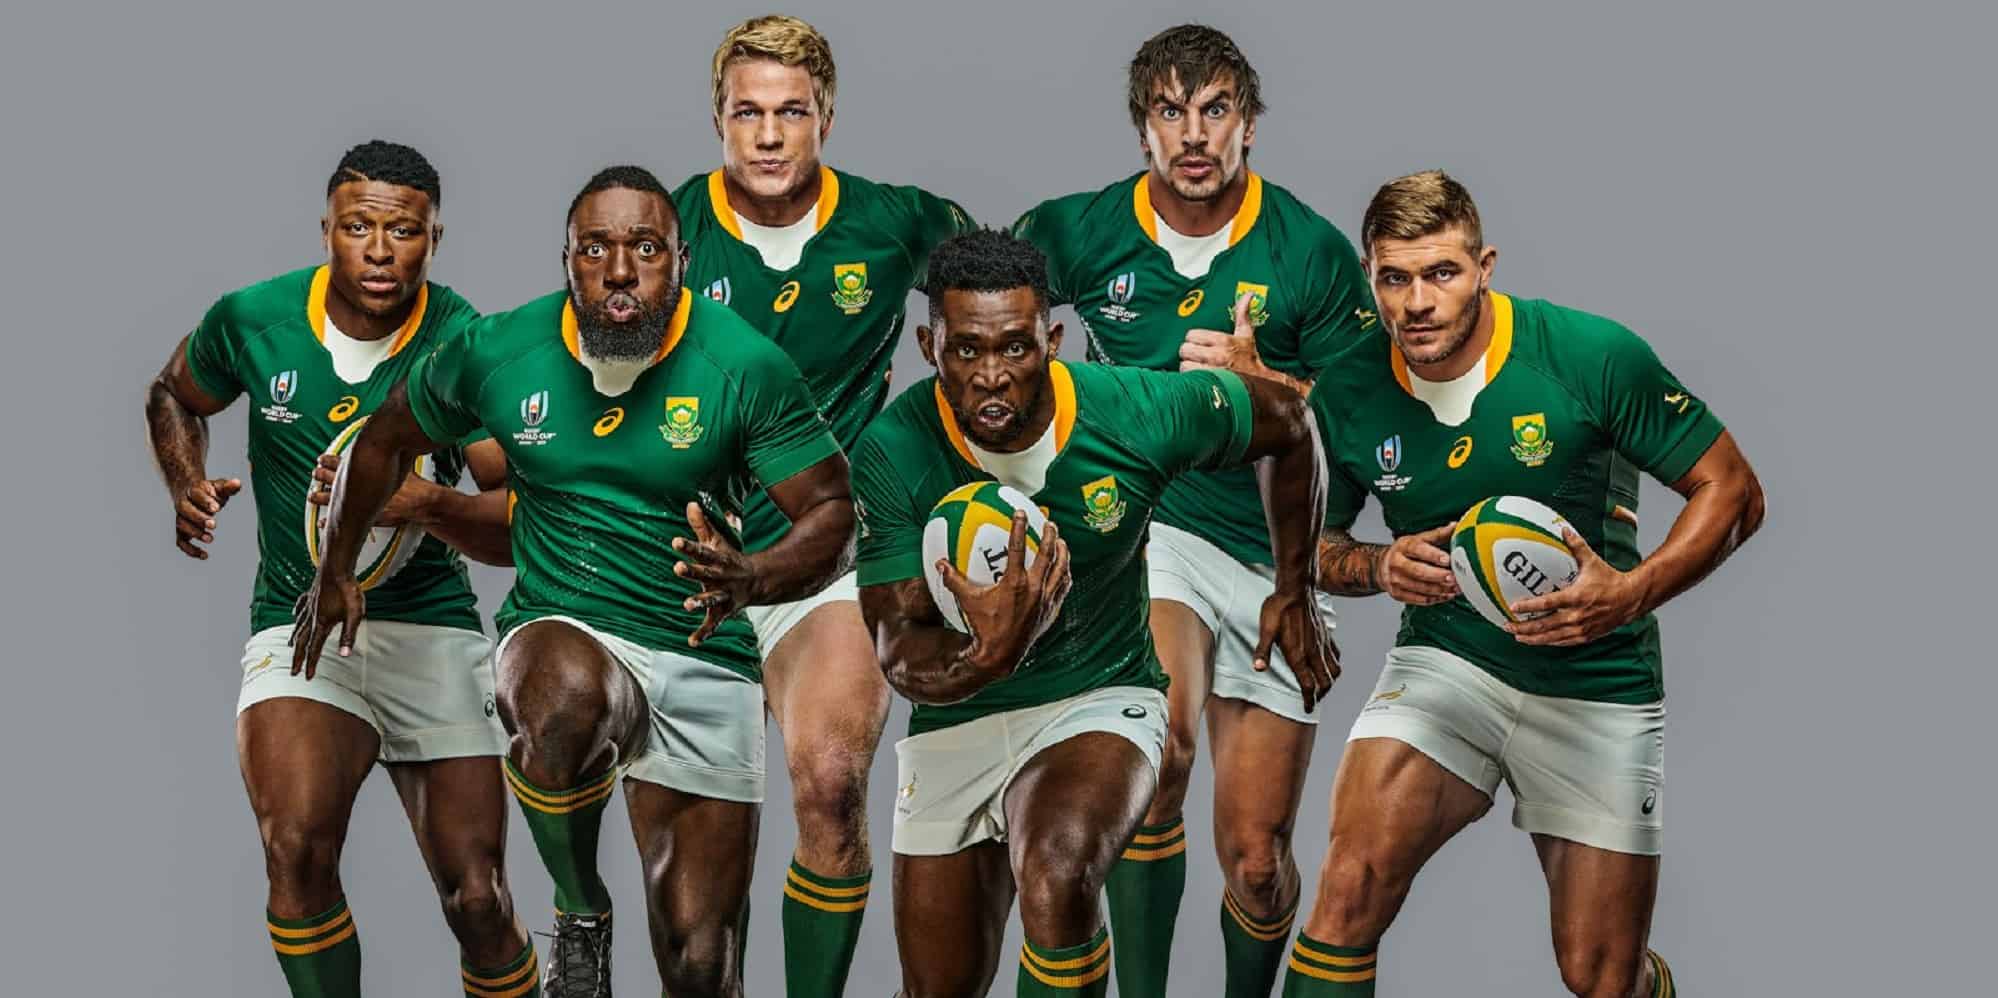 Springboks New kit launched for the 2019 Rugby World Cup [pictures]